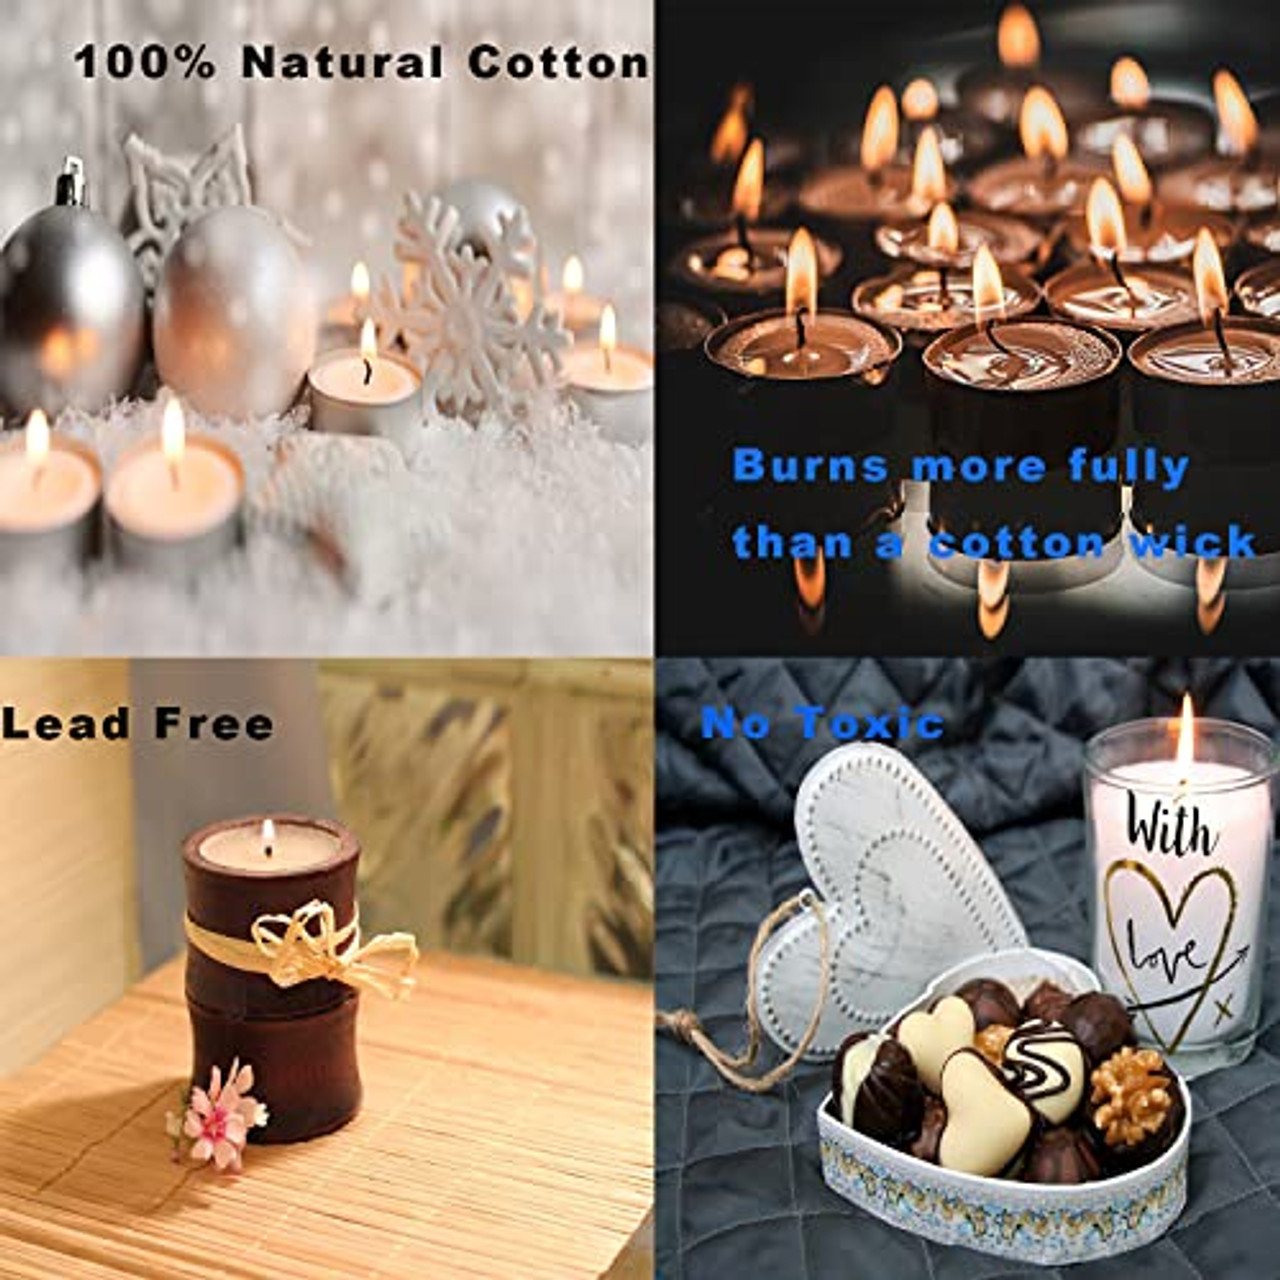 100pcs Cotton Candle Wicks, 6 inches Low Smoke Pre-Waxed Candle